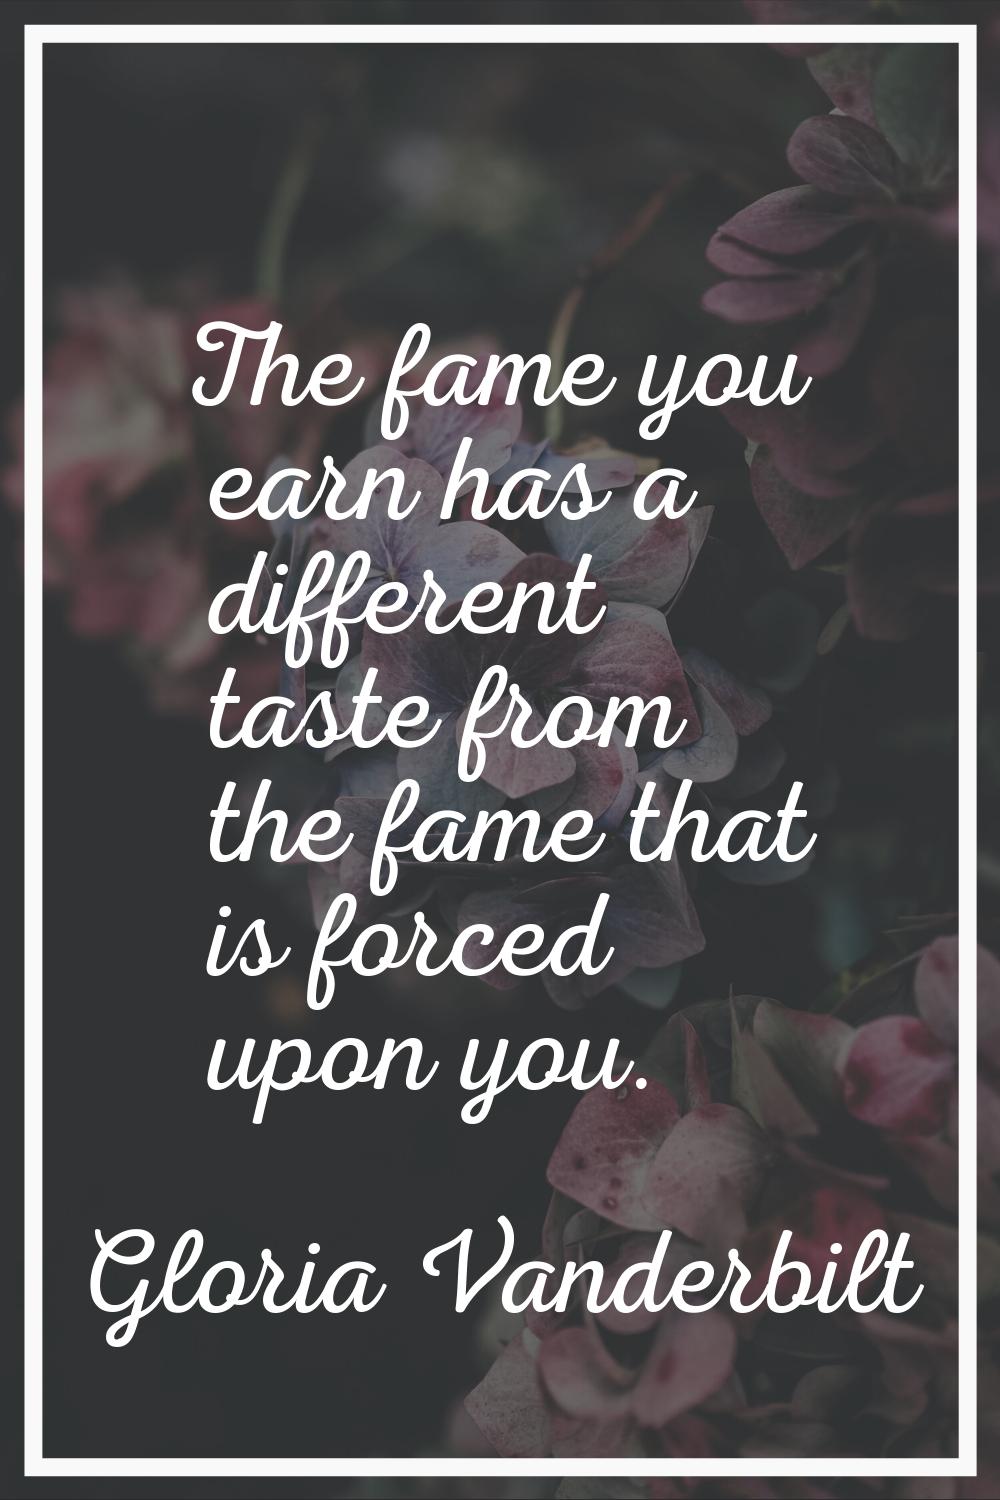 The fame you earn has a different taste from the fame that is forced upon you.